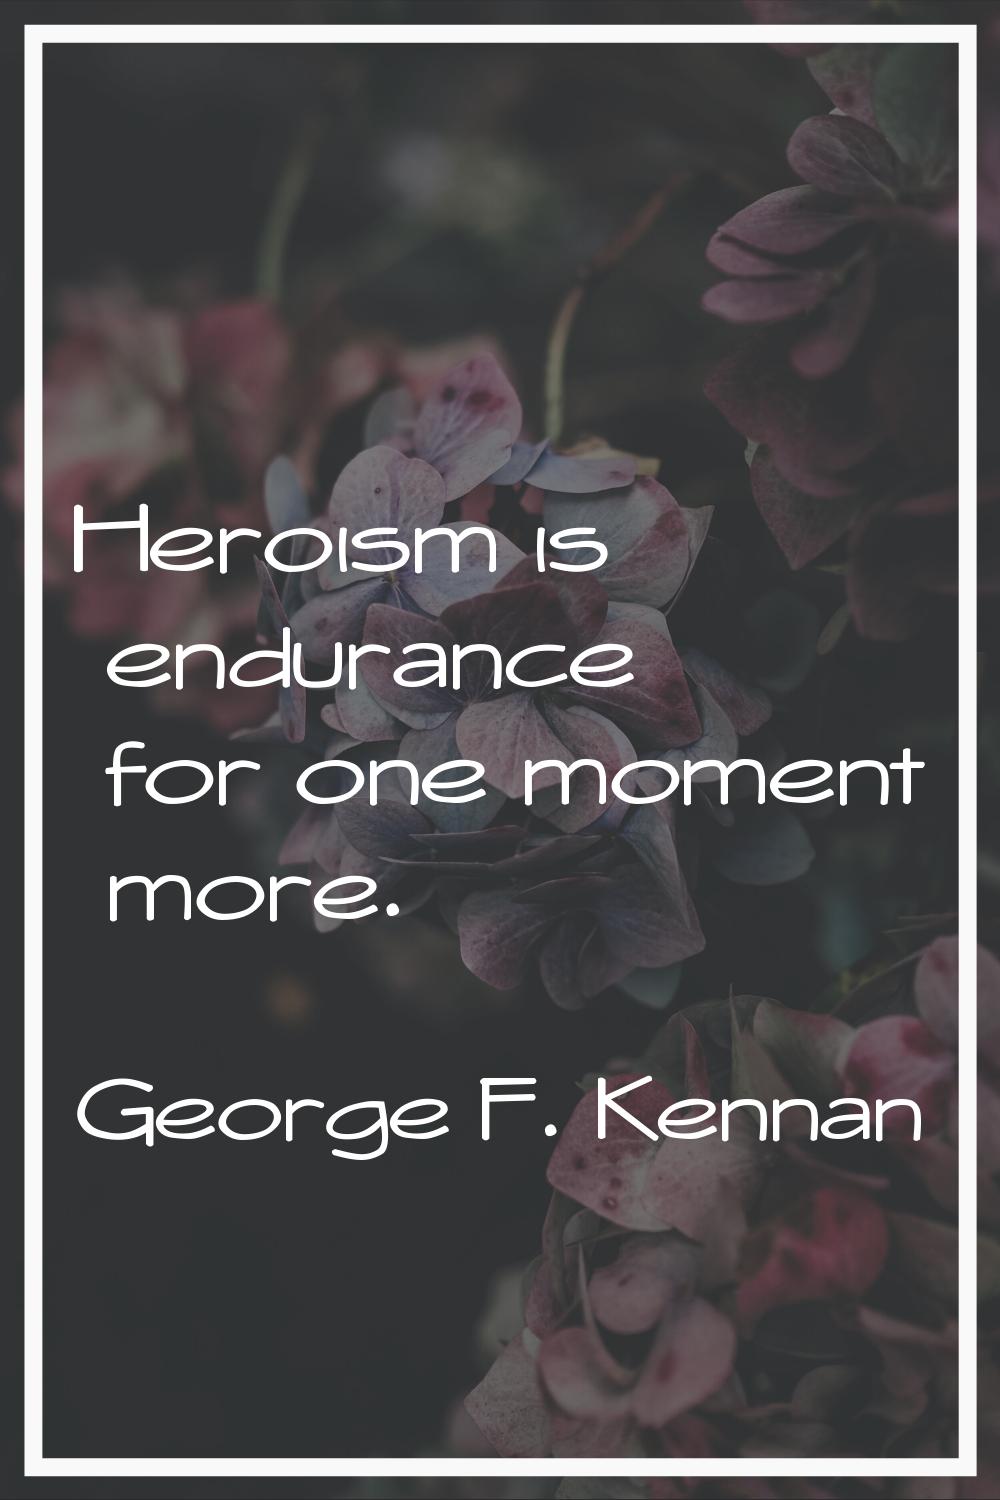 Heroism is endurance for one moment more.